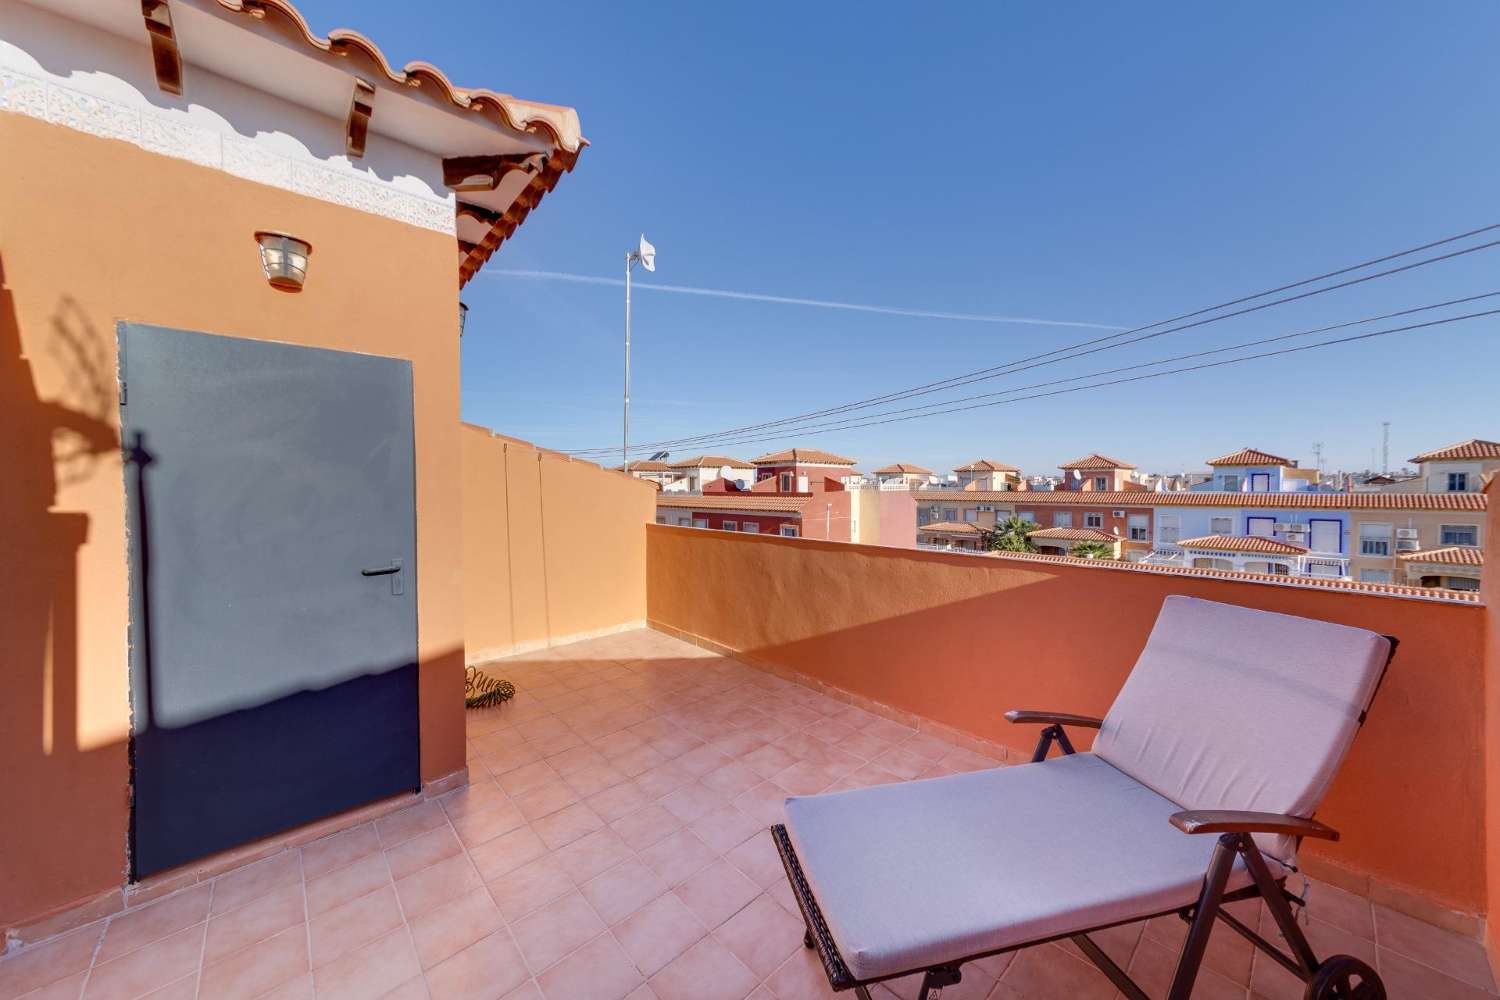 FULLY RENOVATED 2 BEDROOM HOUSE WITH GARDEN, SOLARIUM AND POOL IN TORREVIEJA